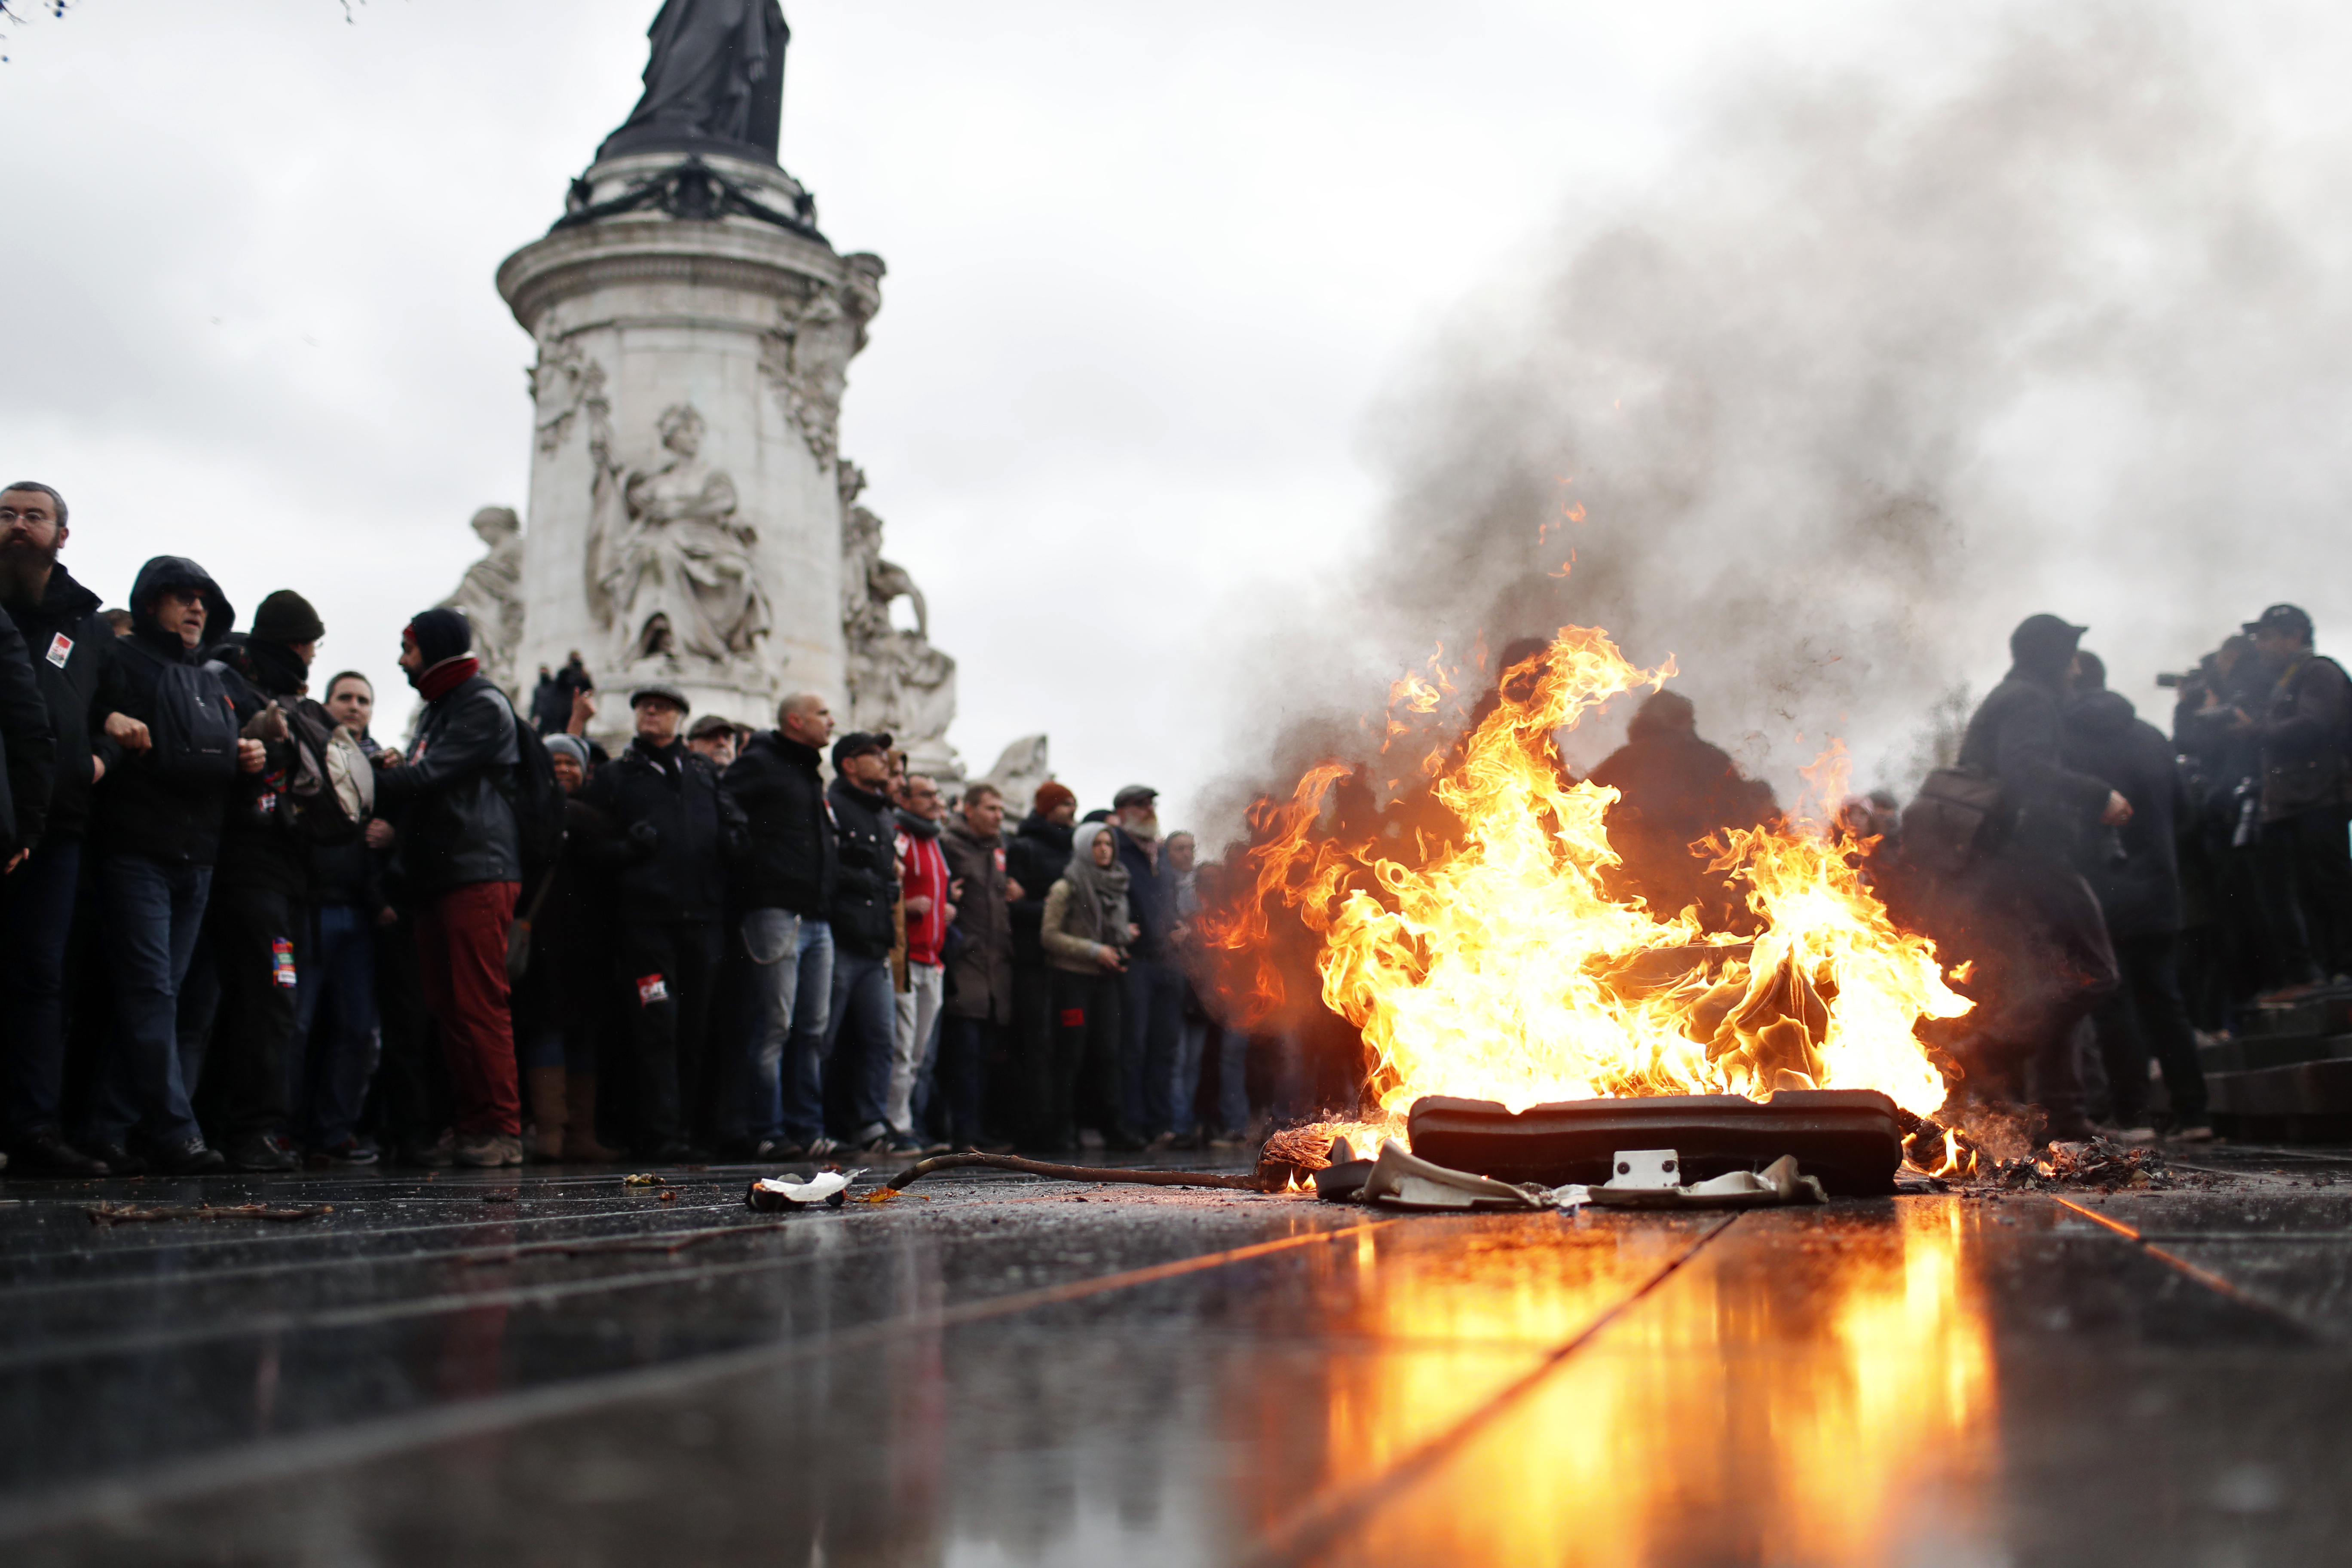 Rioting engulfs Paris as anger grows over high French taxes